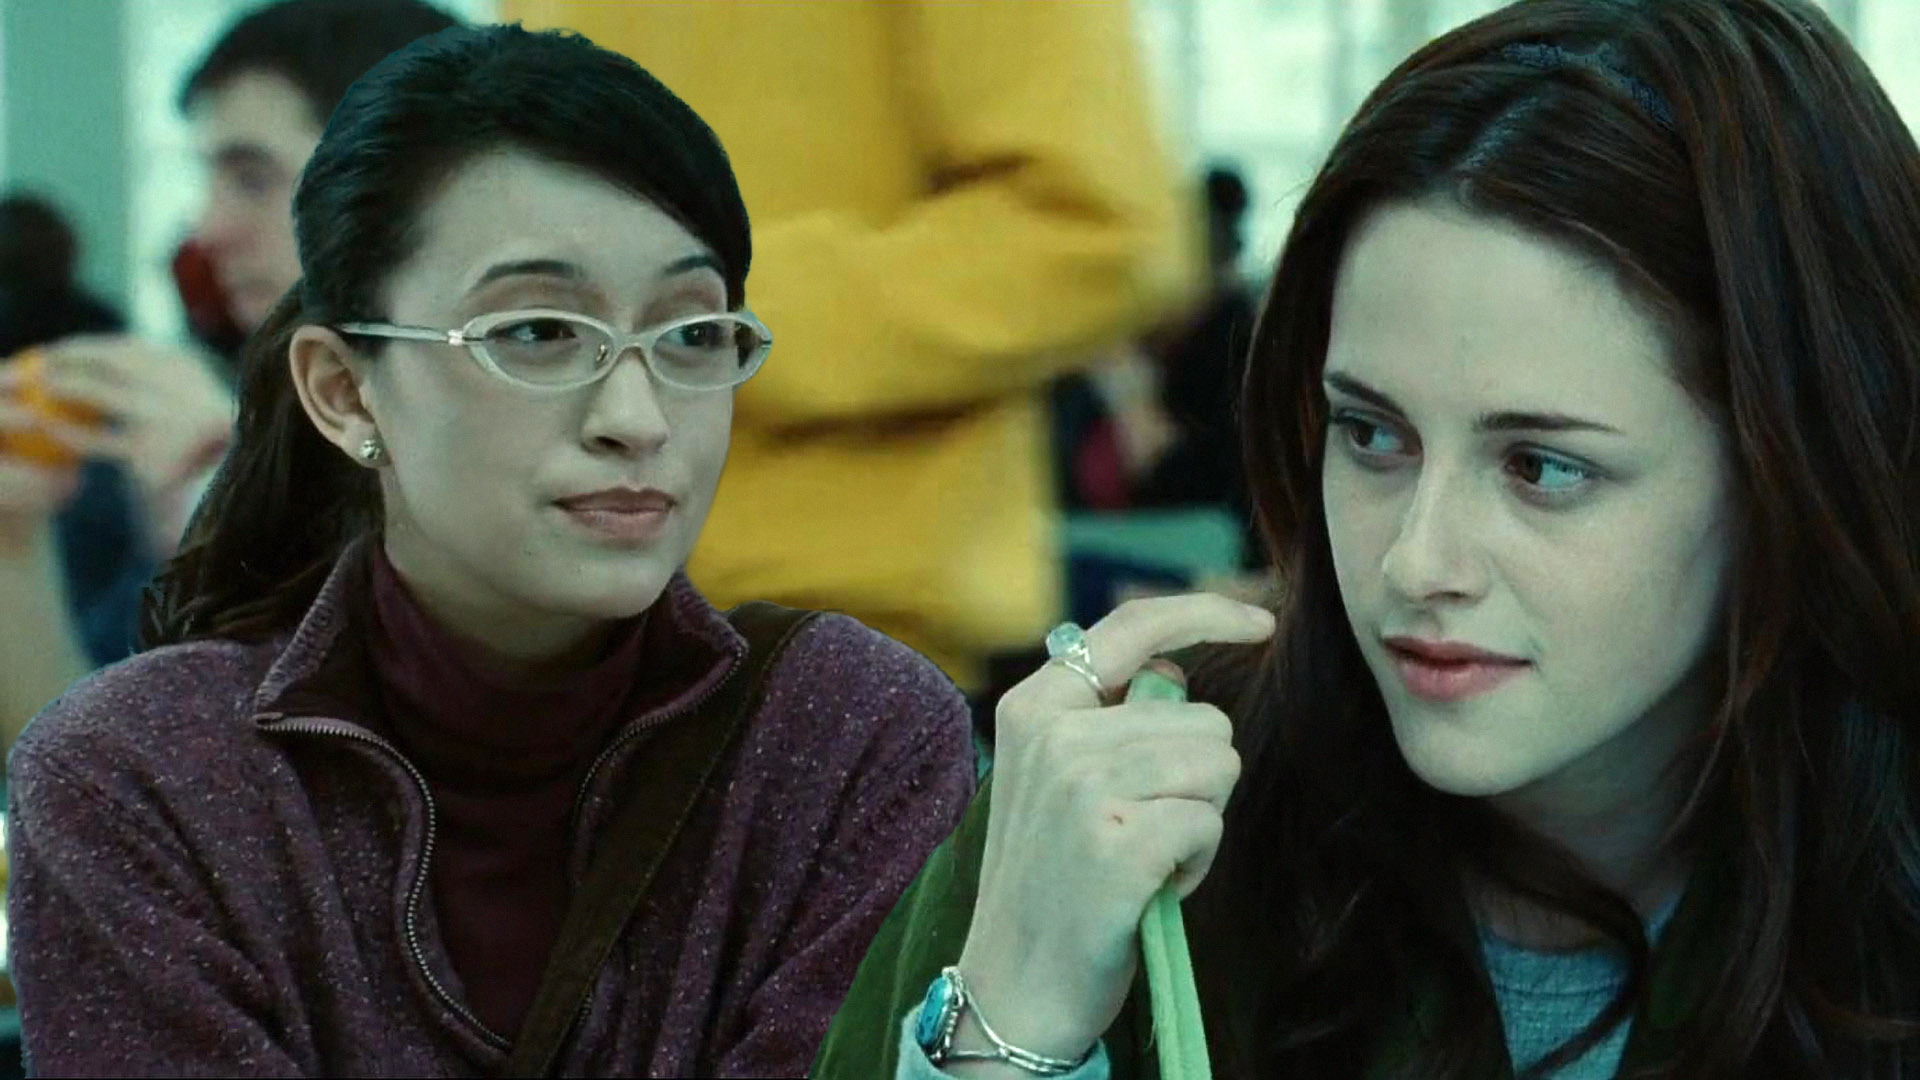 5 Great Twilight Book Scenes That Didn't Make It Into the Movies